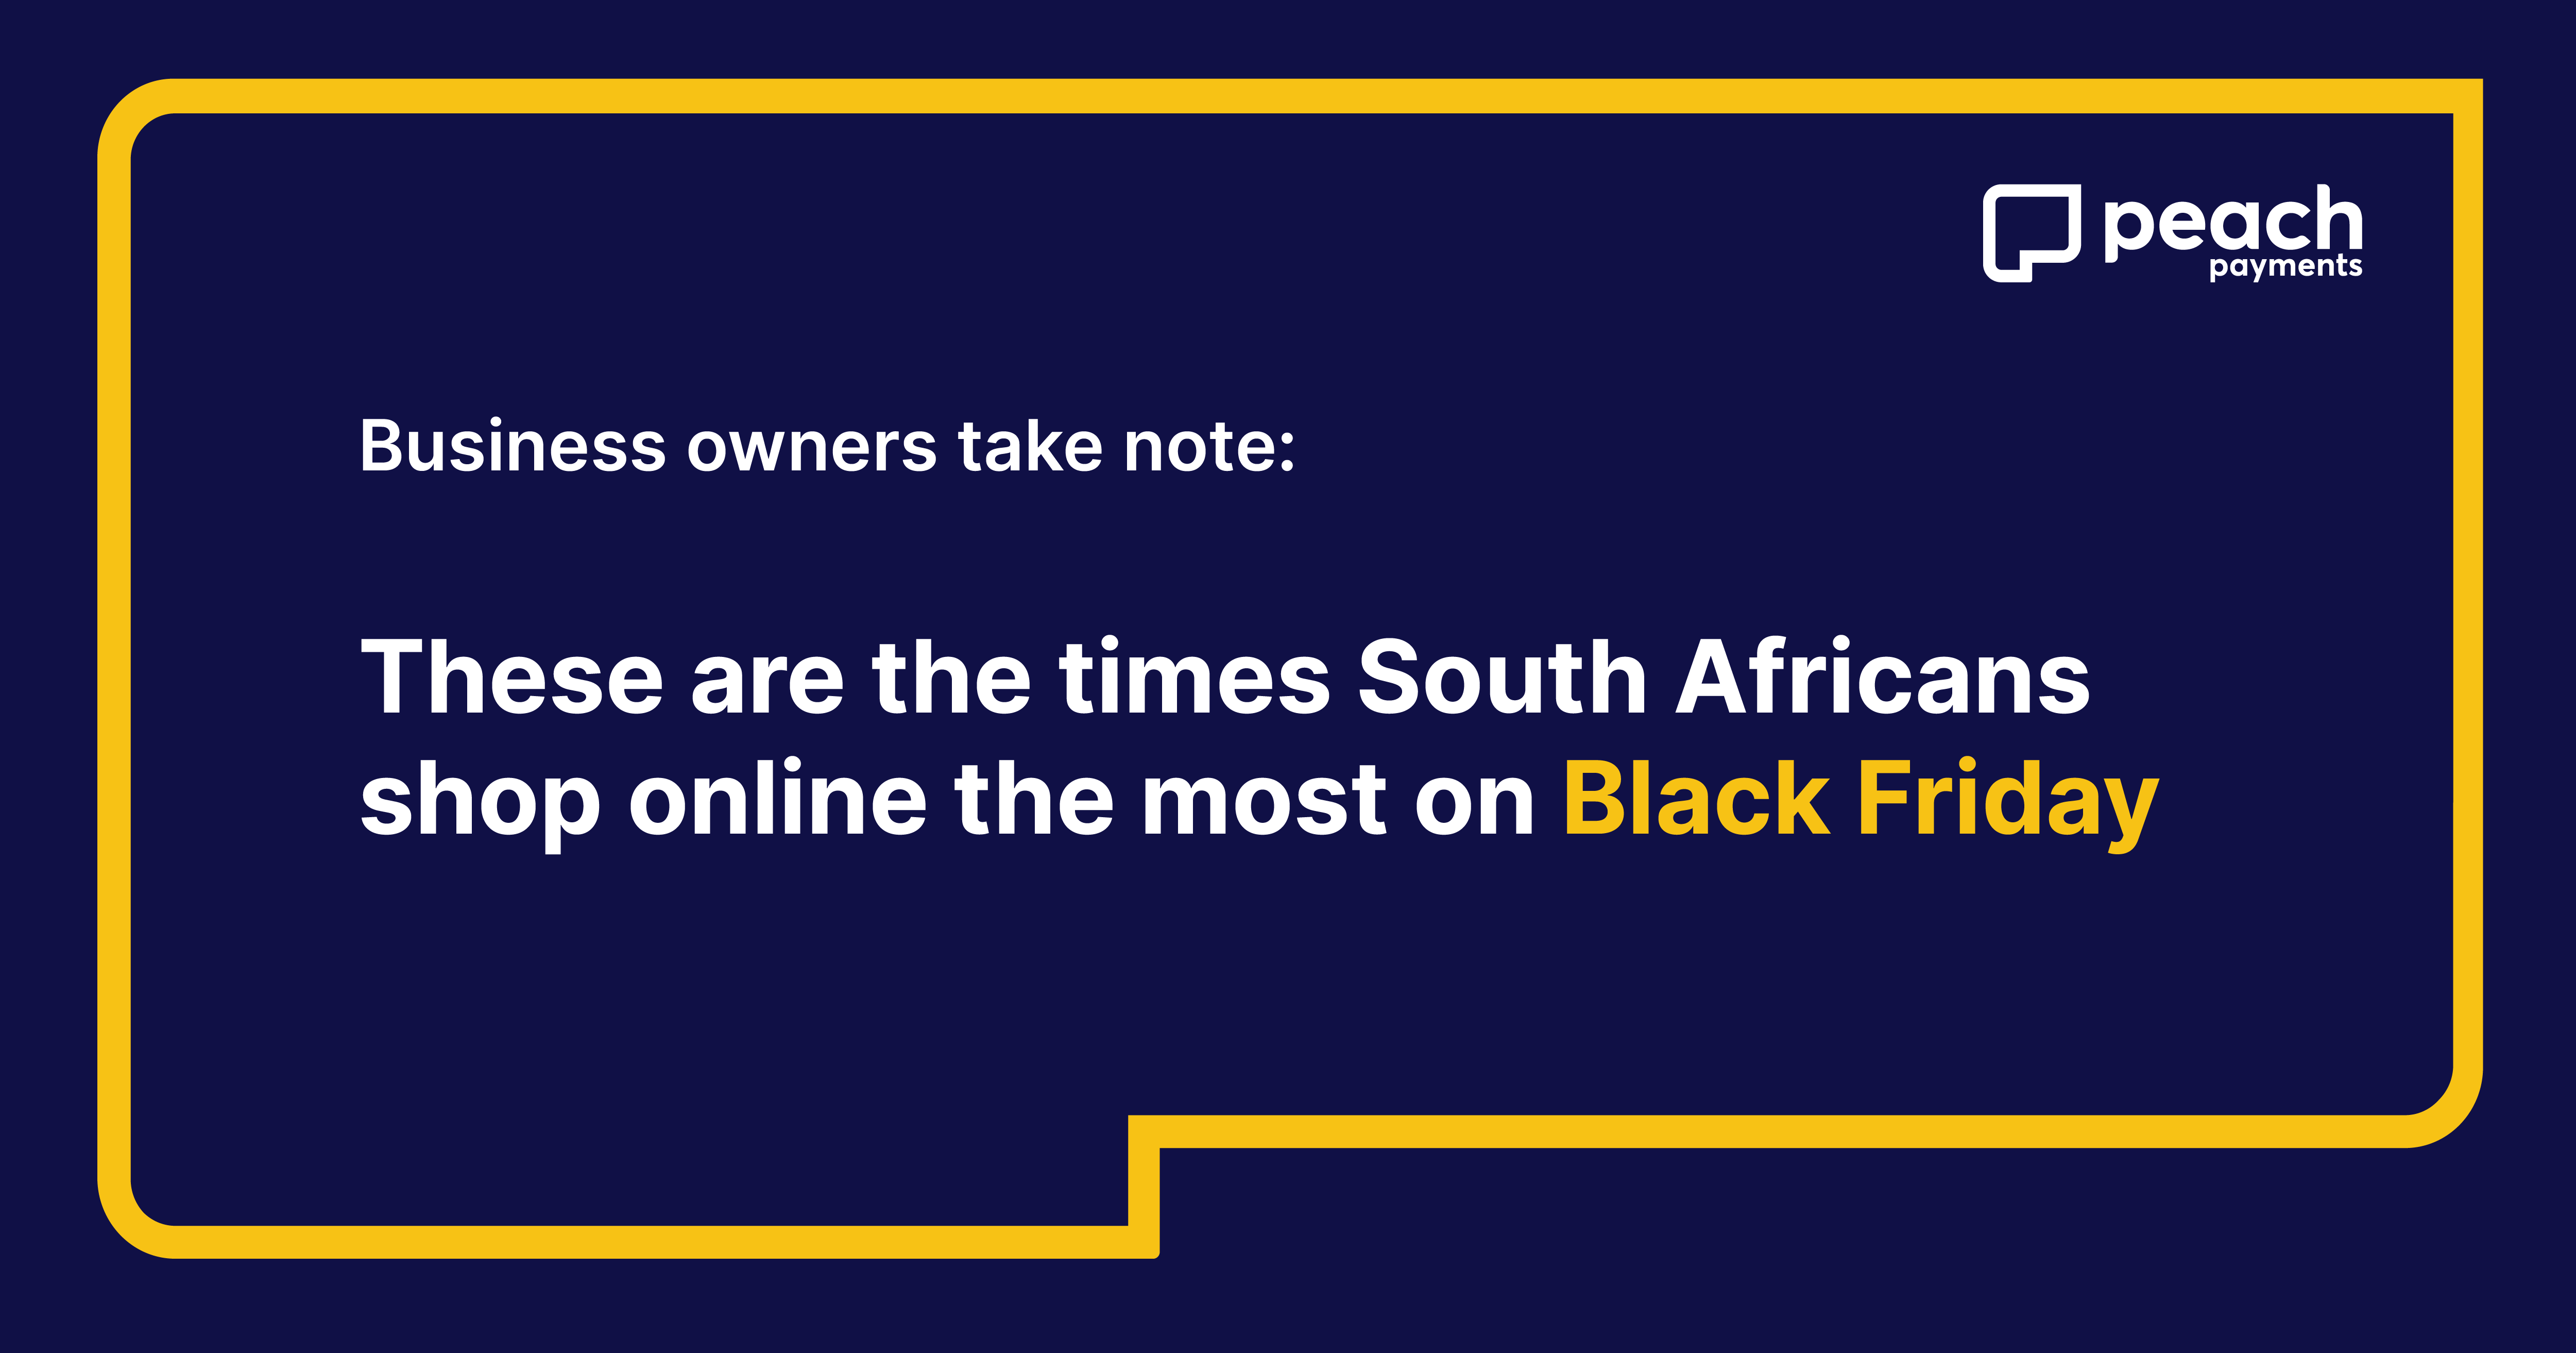 Business owners take note: These are the times South Africans shop online the most on Black Friday